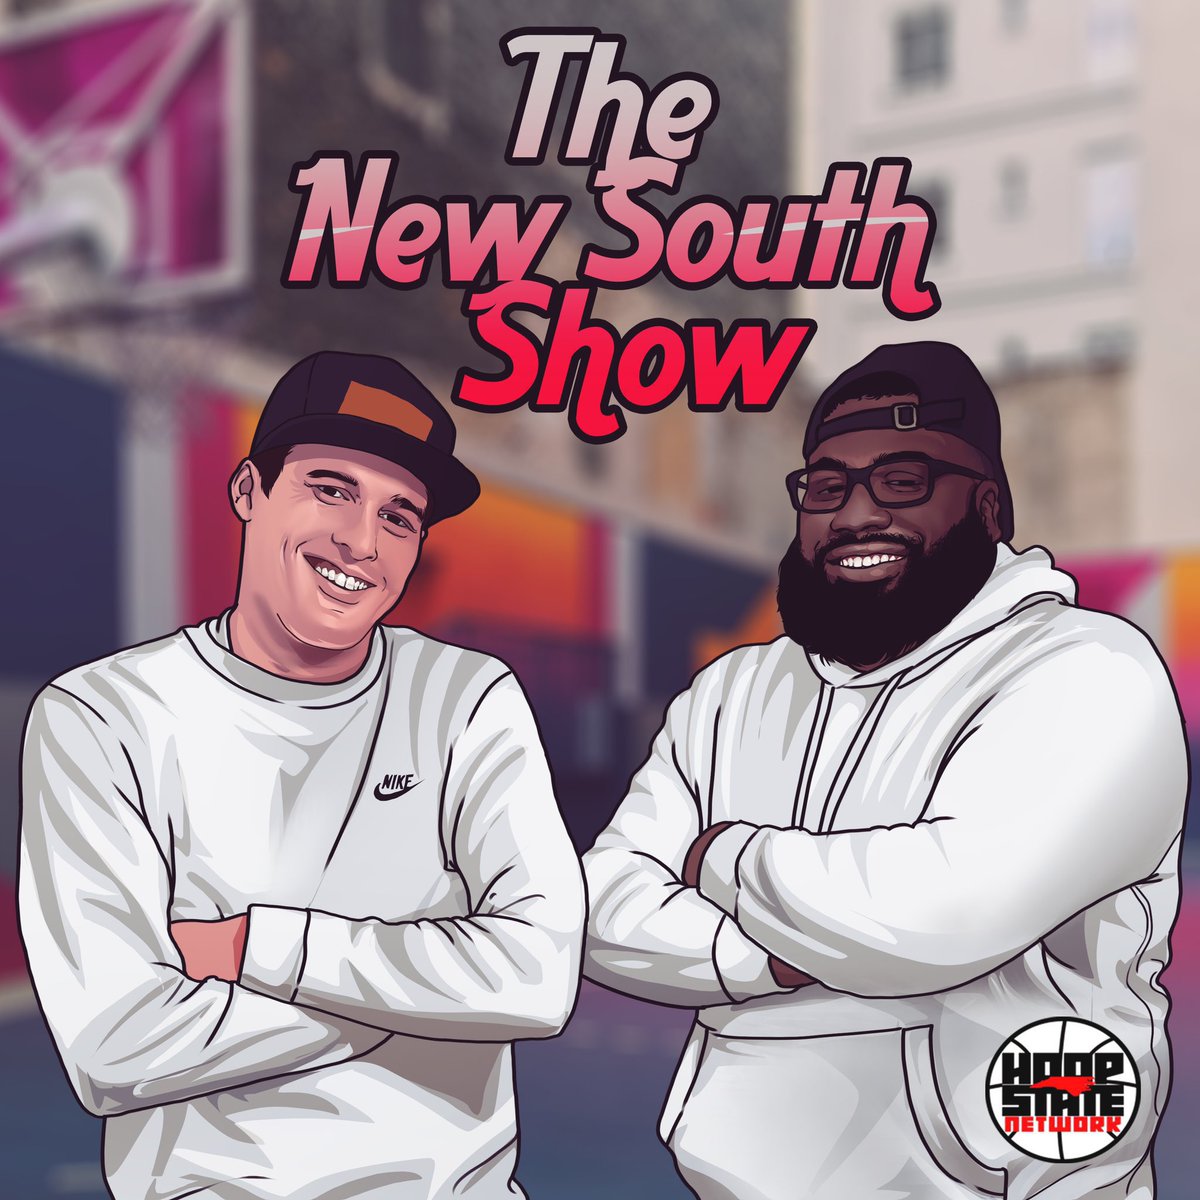 🚨NEW EPISODE🚨 On episode 5, @MasercolaMiles joins @Rod_Bridgers & @HoopStateWebb to discuss: NC State’s magical run College 🏀 coaching changes NCAA women > men & more!! LISTEN🎧 spoti.fi/4aOgFOJ (spotify) bit.ly/49tTNmB (apple) #TheNewSouth #HoopState